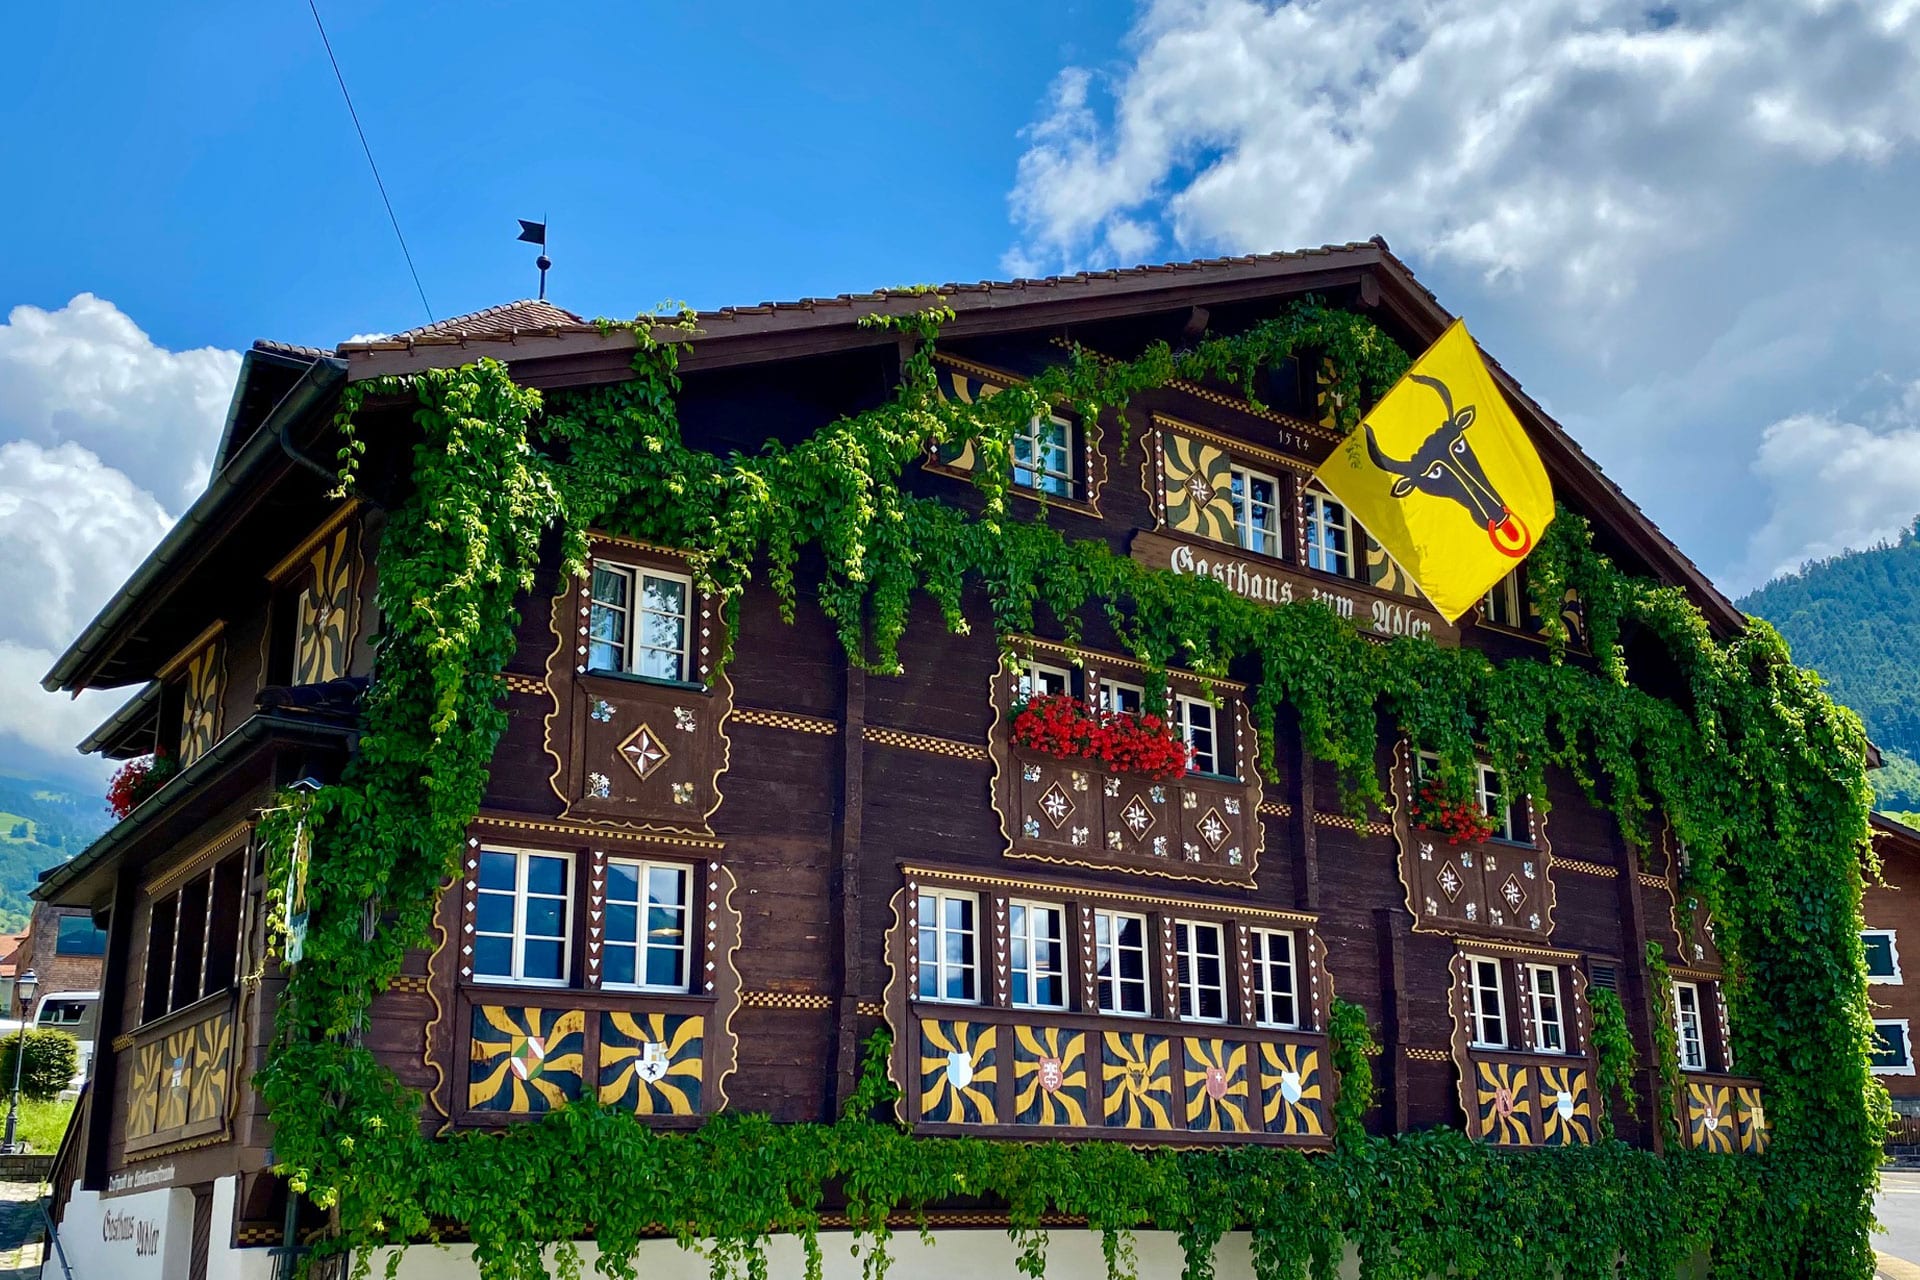 Hidden gems Private Day Tour: The Natural of Wonders of Switzerland (from Basel)